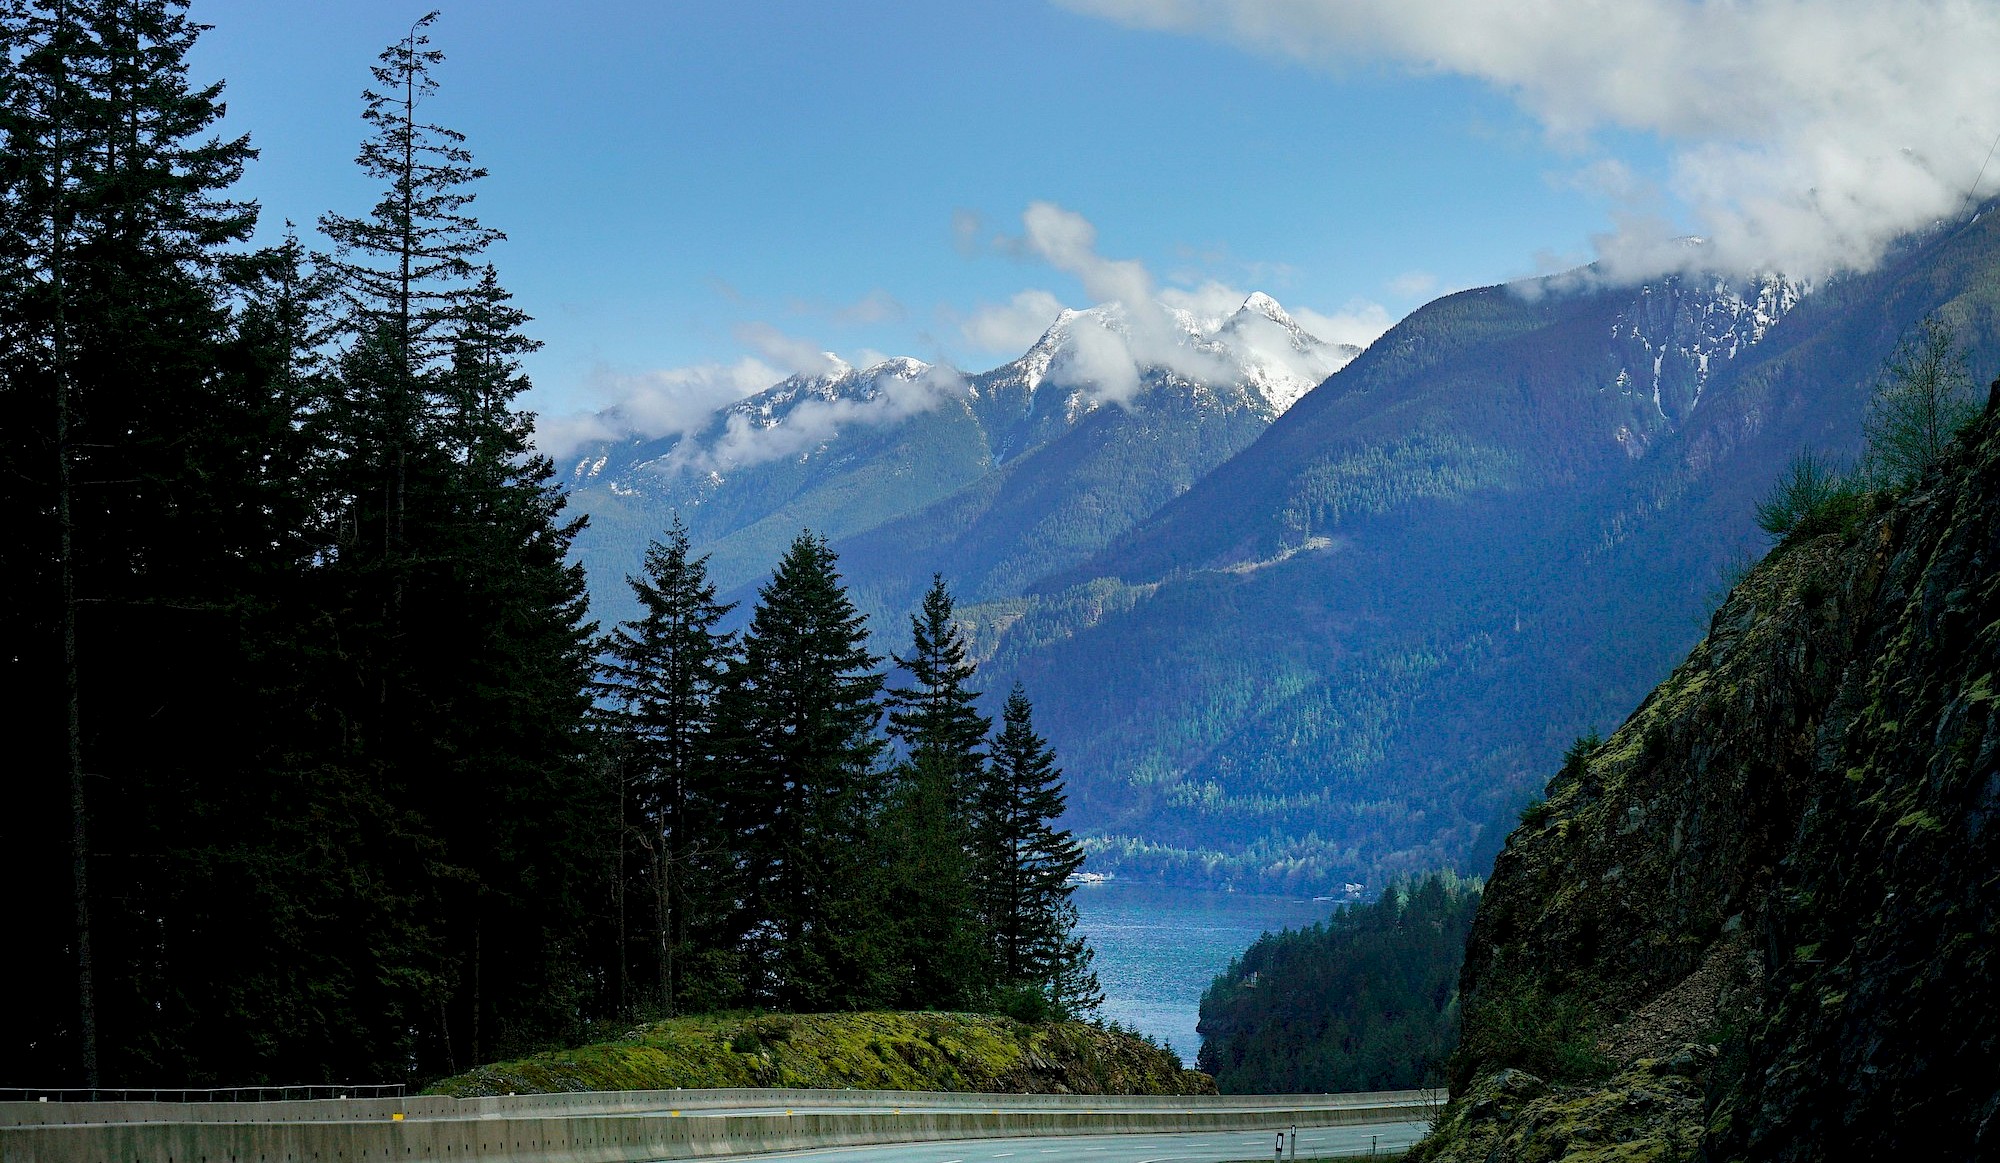 View of the mountains and ocean on the Sea to Sky Highway